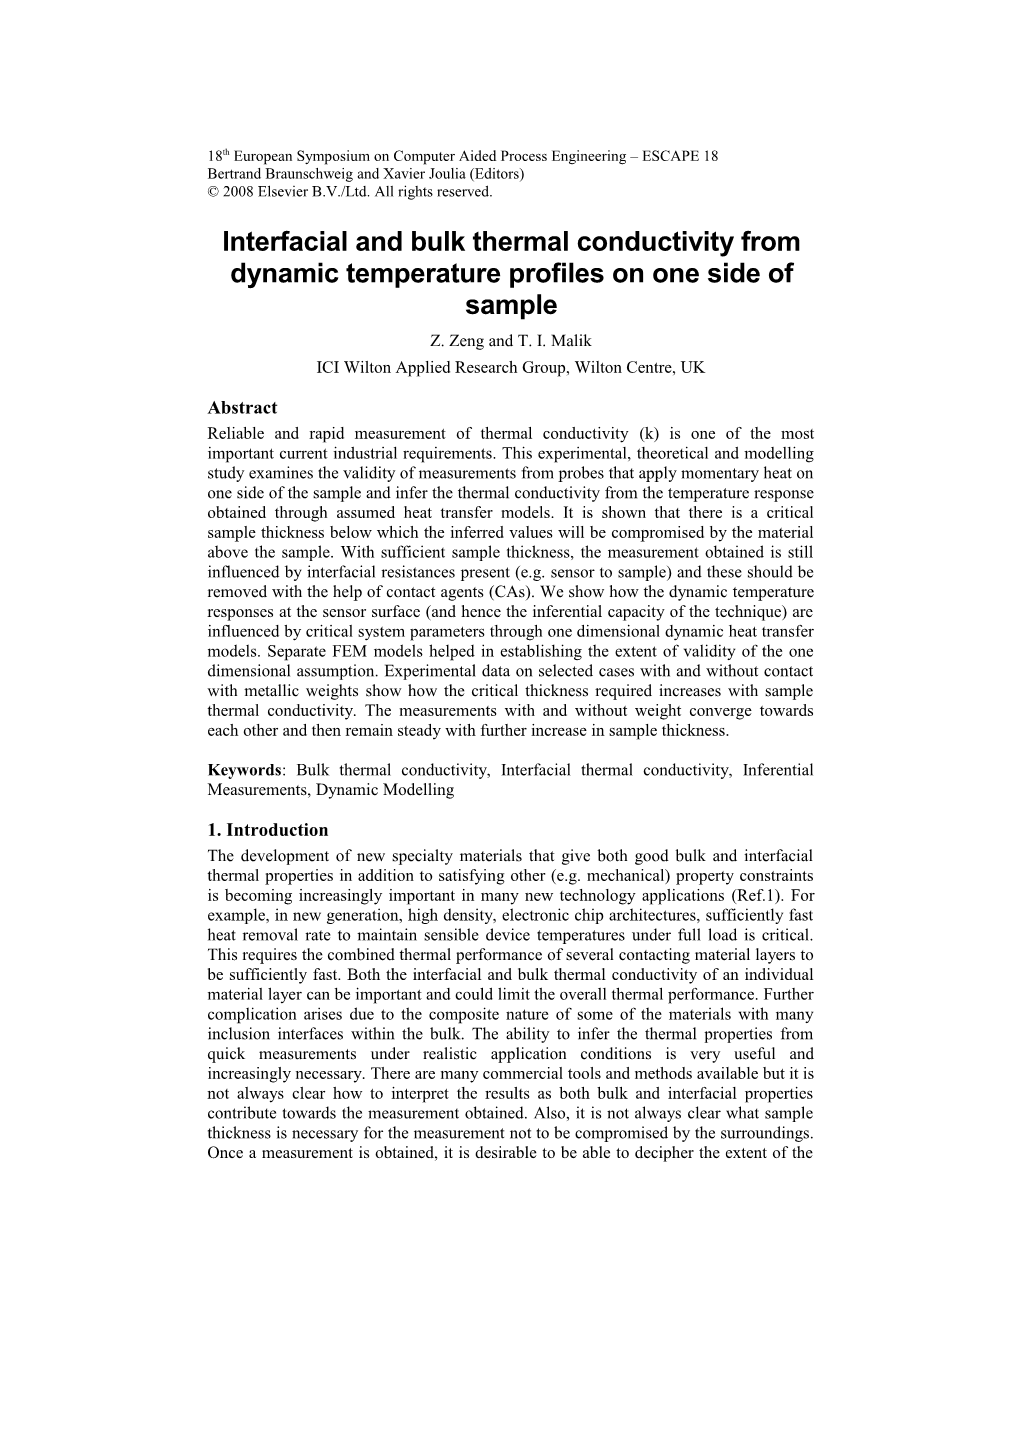 Interfacial and Bulk Thermal Conductivity from Dynamic Temperature Profiles on One Side